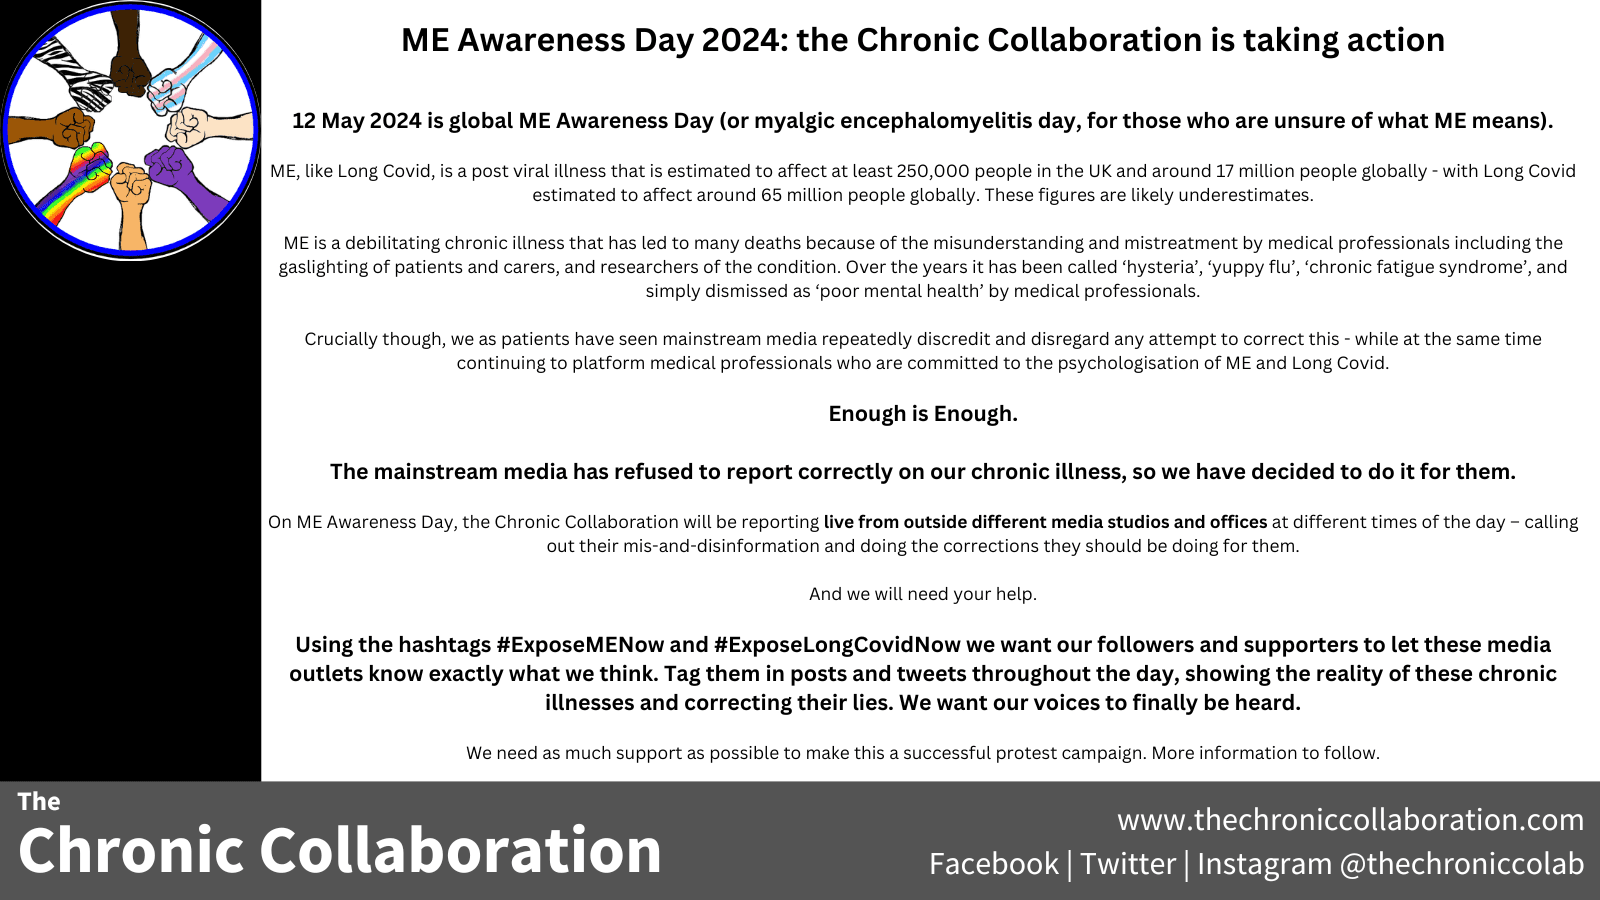 ME Awareness Day 2024: the Chronic Collaboration is taking action

12 May 2024 is global ME Awareness Day (or myalgic encephalomyelitis day, for those who are unsure of what ME means). 

ME, like Long Covid, is a post viral illness that is estimated to affect at least 250,000 people in the UK and around 17 million people globally - with Long Covid estimated to affect around 65 million people globally. These figures are likely underestimates.  

ME is a debilitating chronic illness that has led to many deaths because of the misunderstanding and mistreatment by medical professionals including the gaslighting of patients and carers, and researchers of the condition. Over the years it has been called ‘hysteria’, ‘yuppy flu’, ‘chronic fatigue syndrome’, and simply dismissed as ‘poor mental health’ by medical professionals. 

Crucially though, we as patients have seen mainstream media repeatedly discredit and disregard any attempt to correct this - while at the same time continuing to platform medical professionals who are committed to the psychologisation of ME and Long Covid. 

Enough is Enough. 

The mainstream media has refused to report correctly on our chronic illness, so we have decided to do it for them. 

On ME Awareness Day, the Chronic Collaboration will be reporting live from outside different media studios and offices at different times of the day – calling out their mis-and-disinformation and doing the corrections they should be doing for them.

And we will need your help. 

Using the hashtags #ExposeMENow and #ExposeLongCovidNow we want our followers and supporters to let these media outlets know exactly what we think. Tag them in posts and tweets throughout the day, showing the reality of these chronic illnesses and correcting their lies. We want our voices to finally be heard. 

We need as much support as possible to make this a successful protest campaign. More information to follow. 